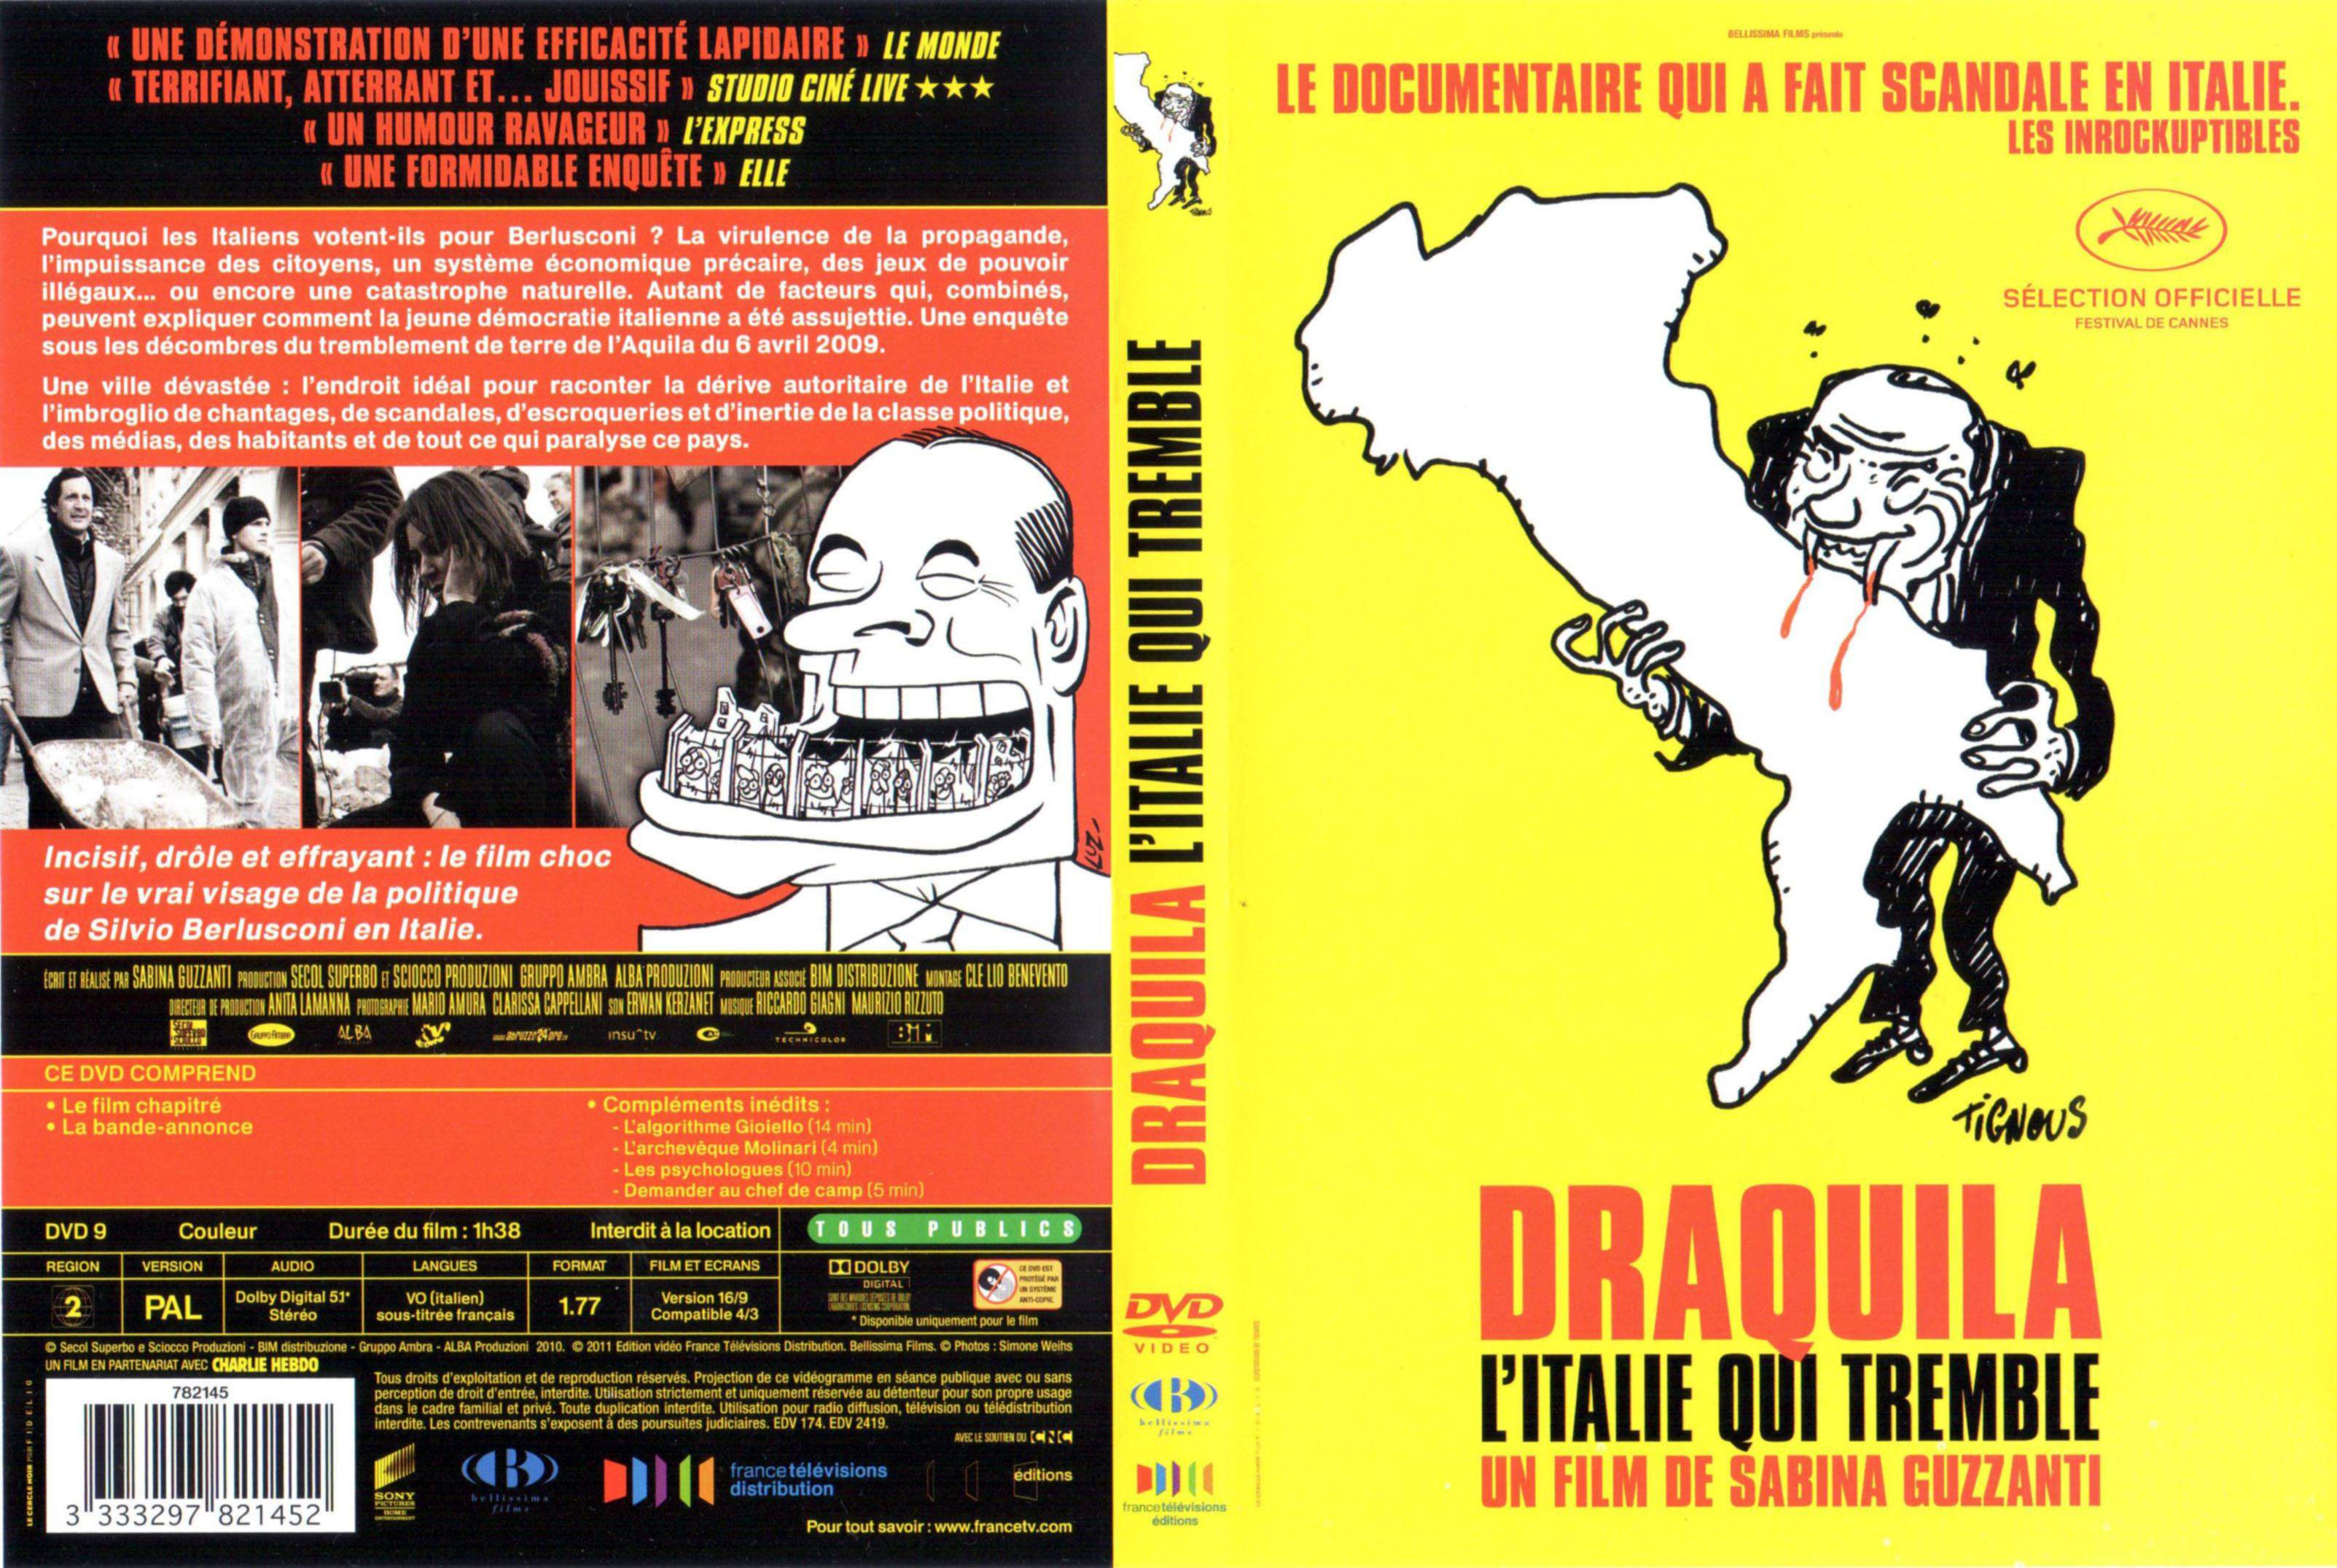 Jaquette DVD Draquila